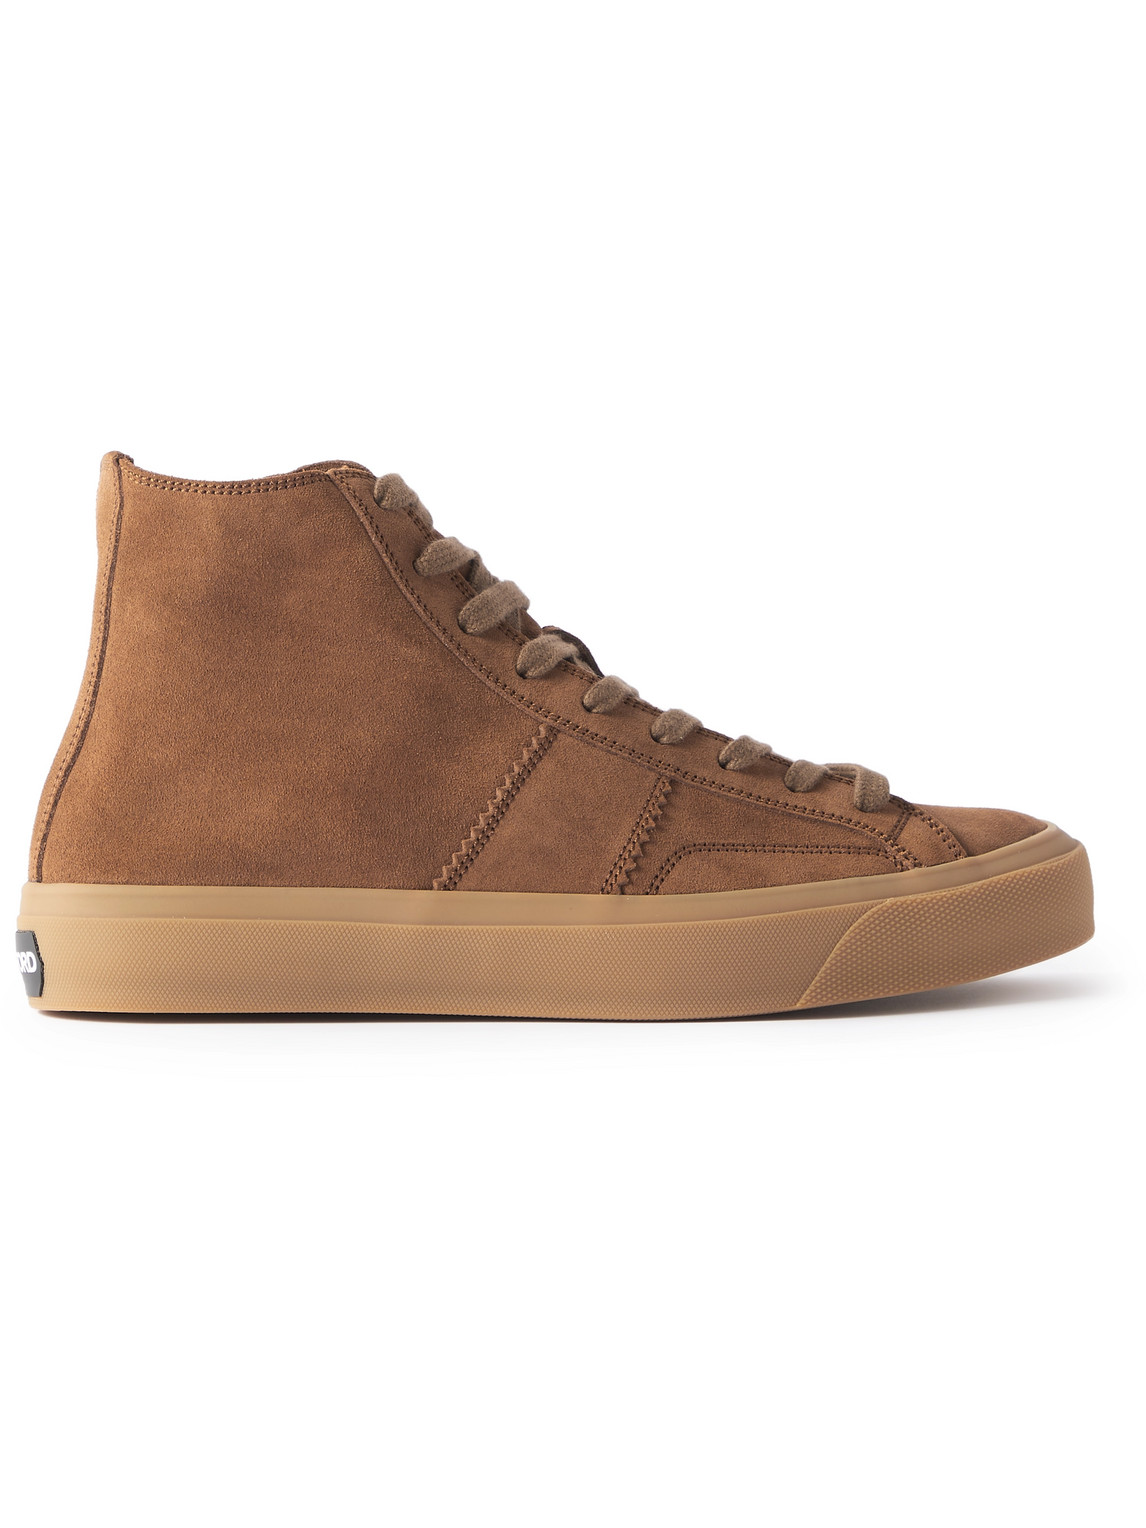 Tom Ford Cambridge Suede High-top Sneakers In Brown